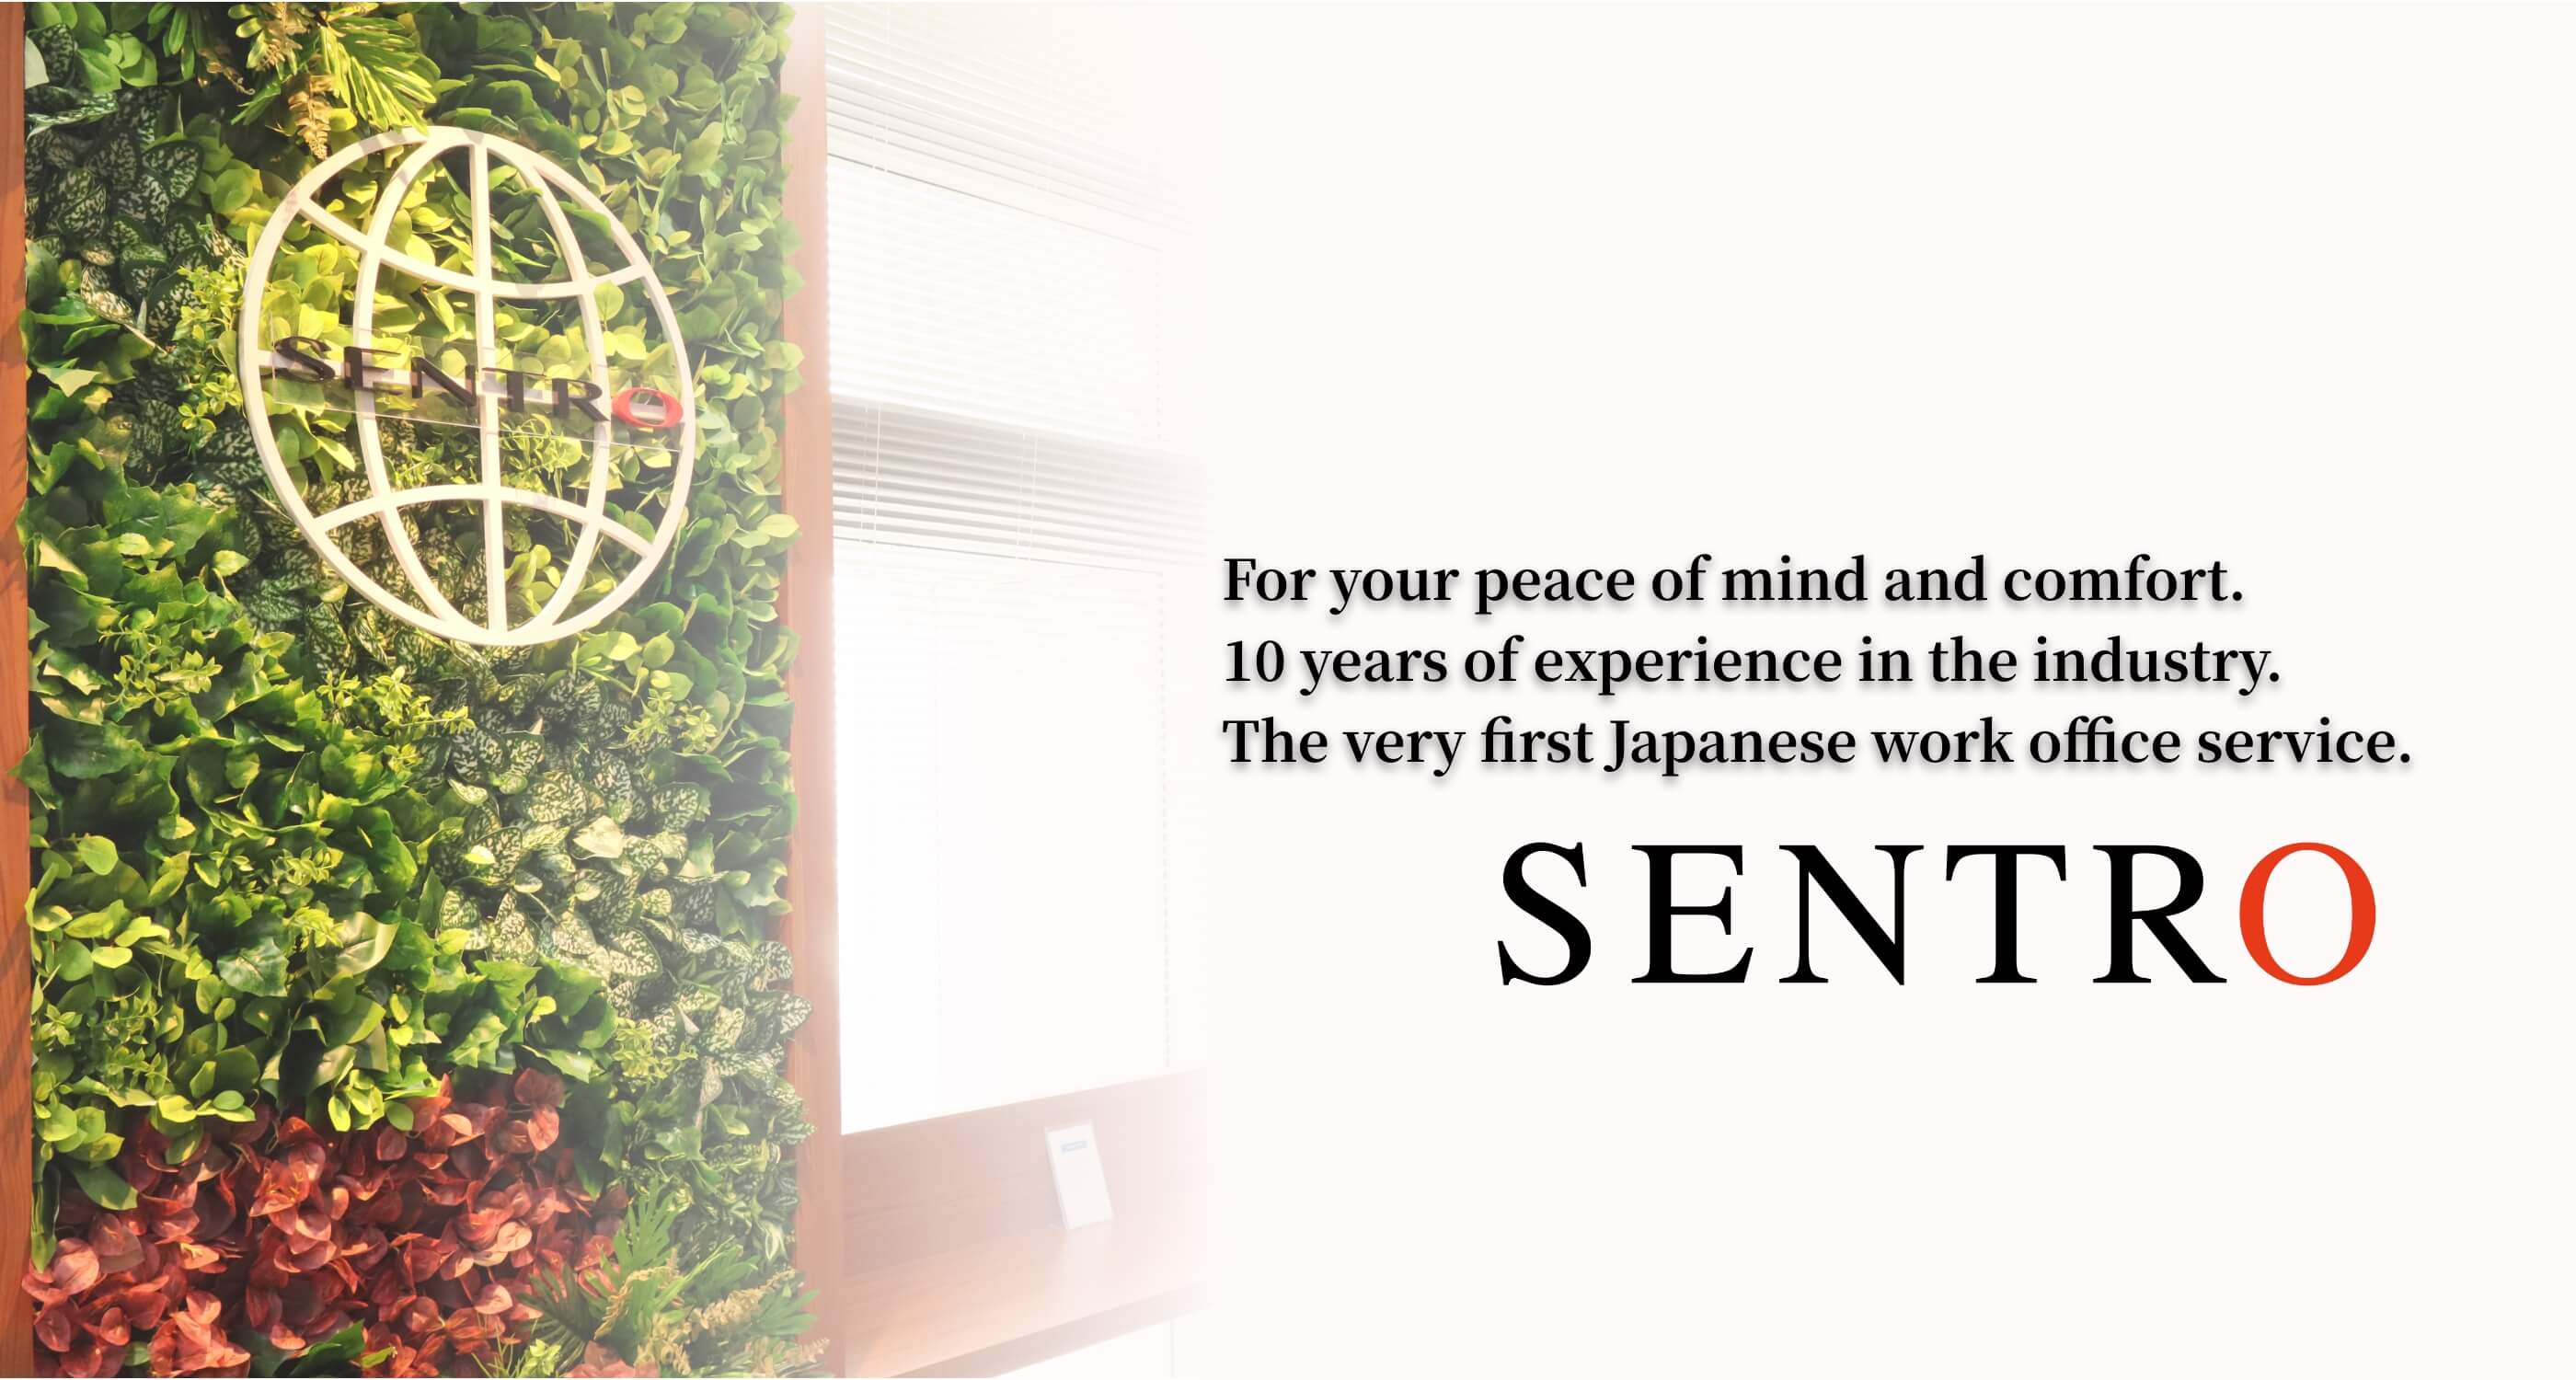 For your peace of mind and comfort. 10 years of experience in the industry. The very first Japanese work office service.